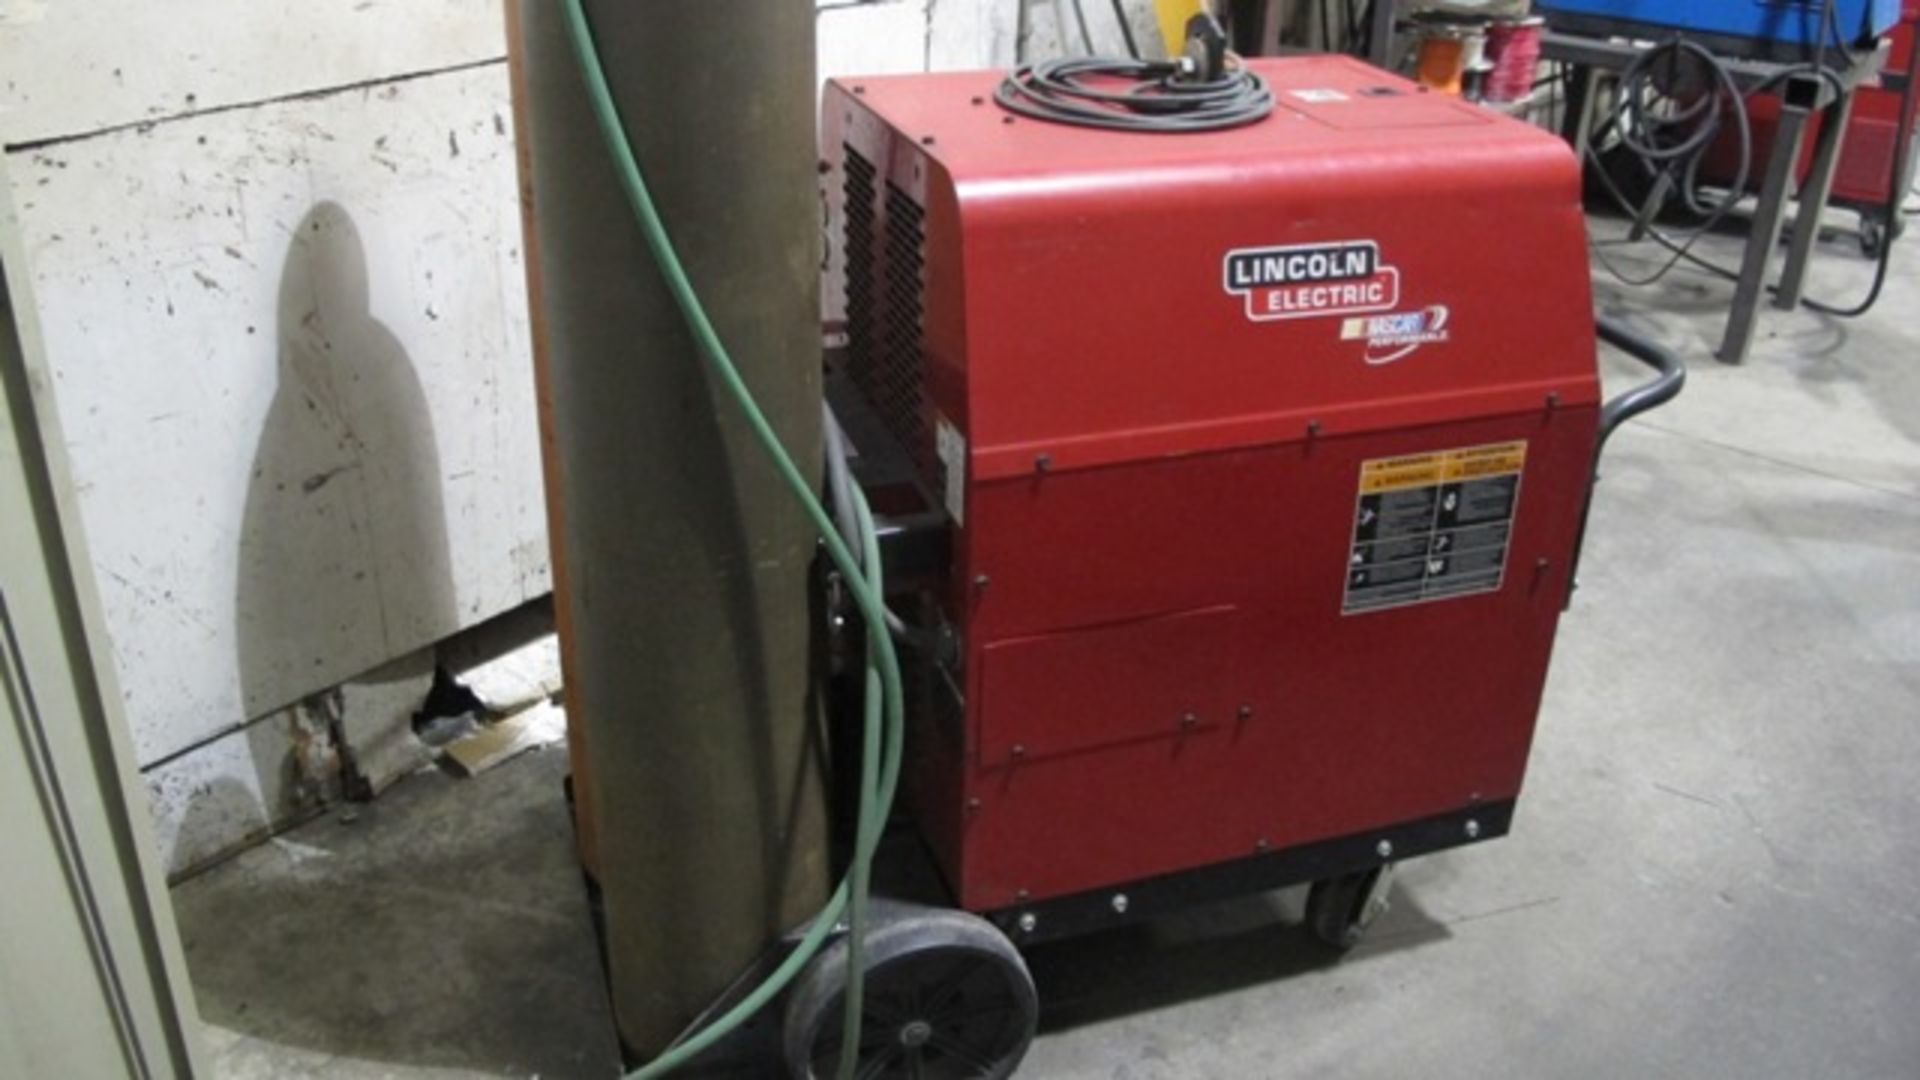 LINCOLN ELECTRIC PRECISION TIG 275 WELDER - Image 2 of 3